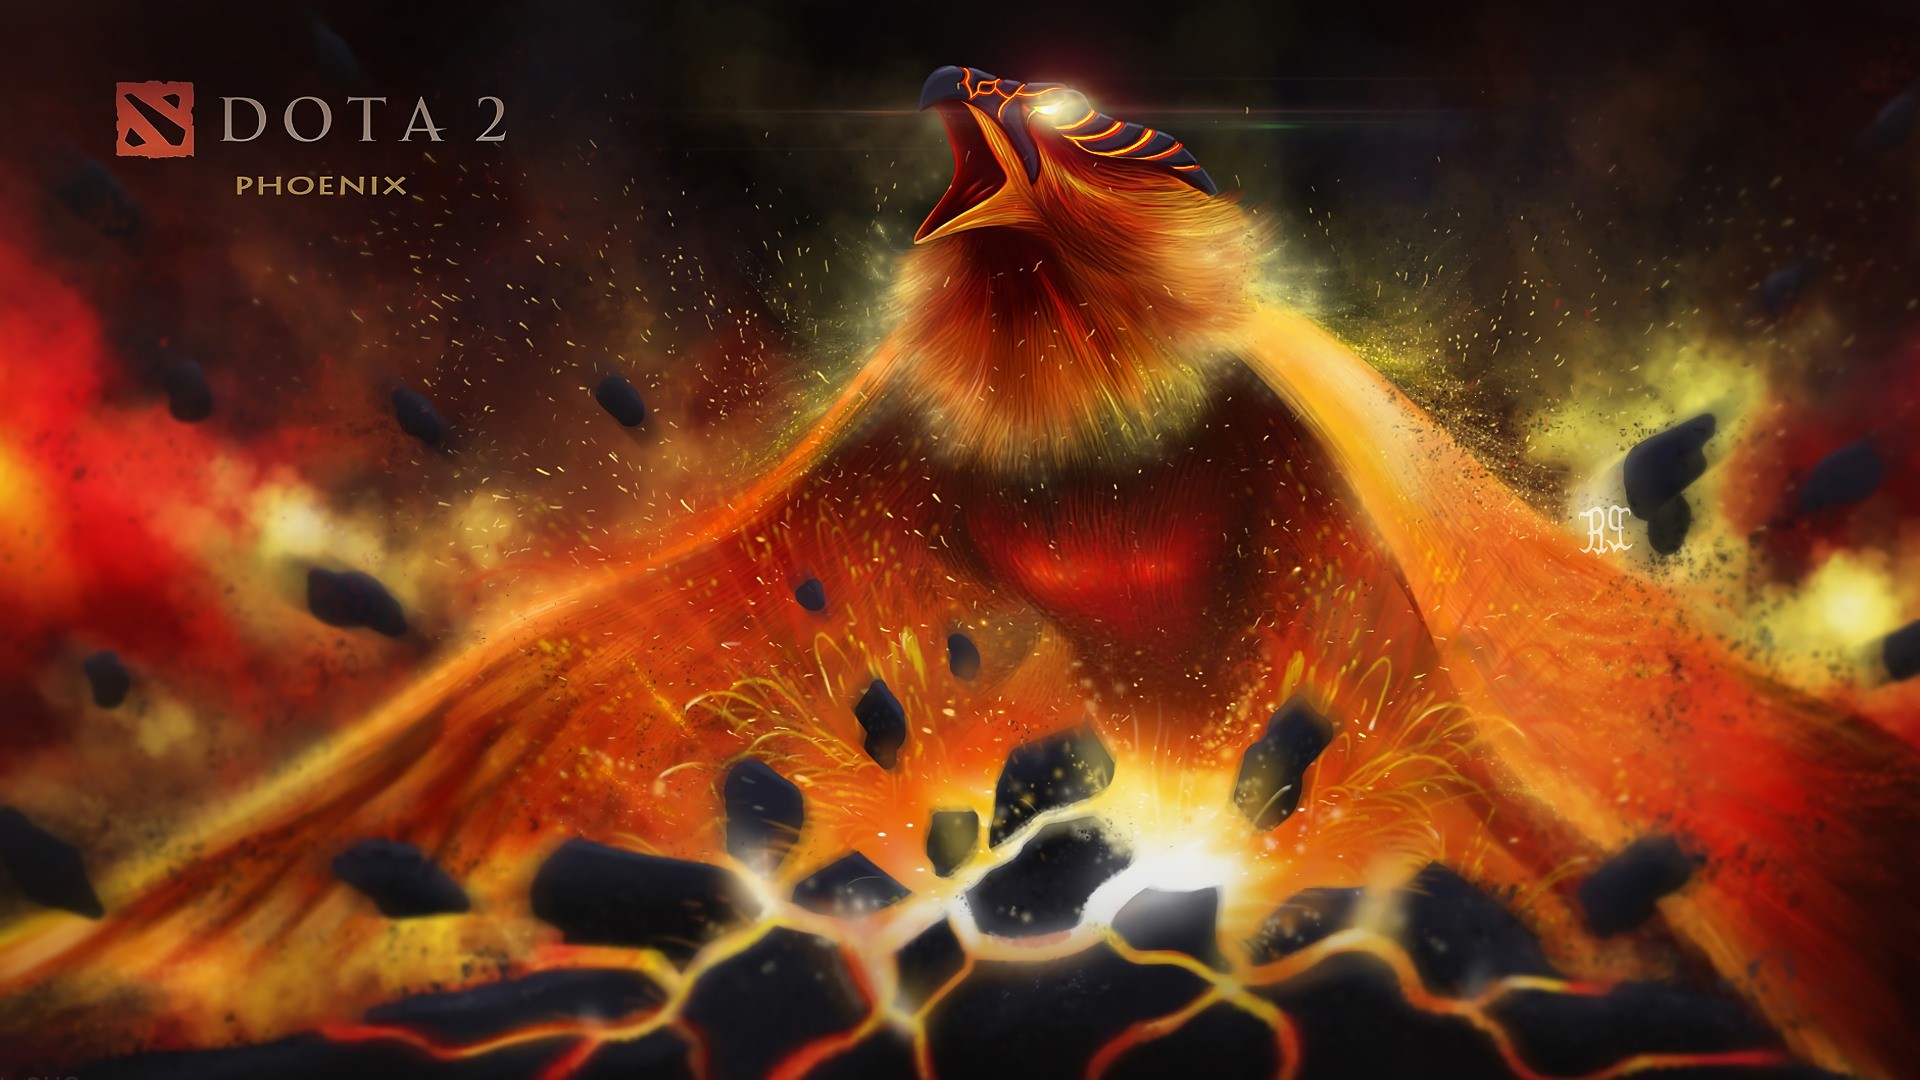 Phoenix Desktop Wallpaper with resolution 1920X1080 pixel. You can use this wallpaper as background for your desktop Computer Screensavers, Android or iPhone smartphones